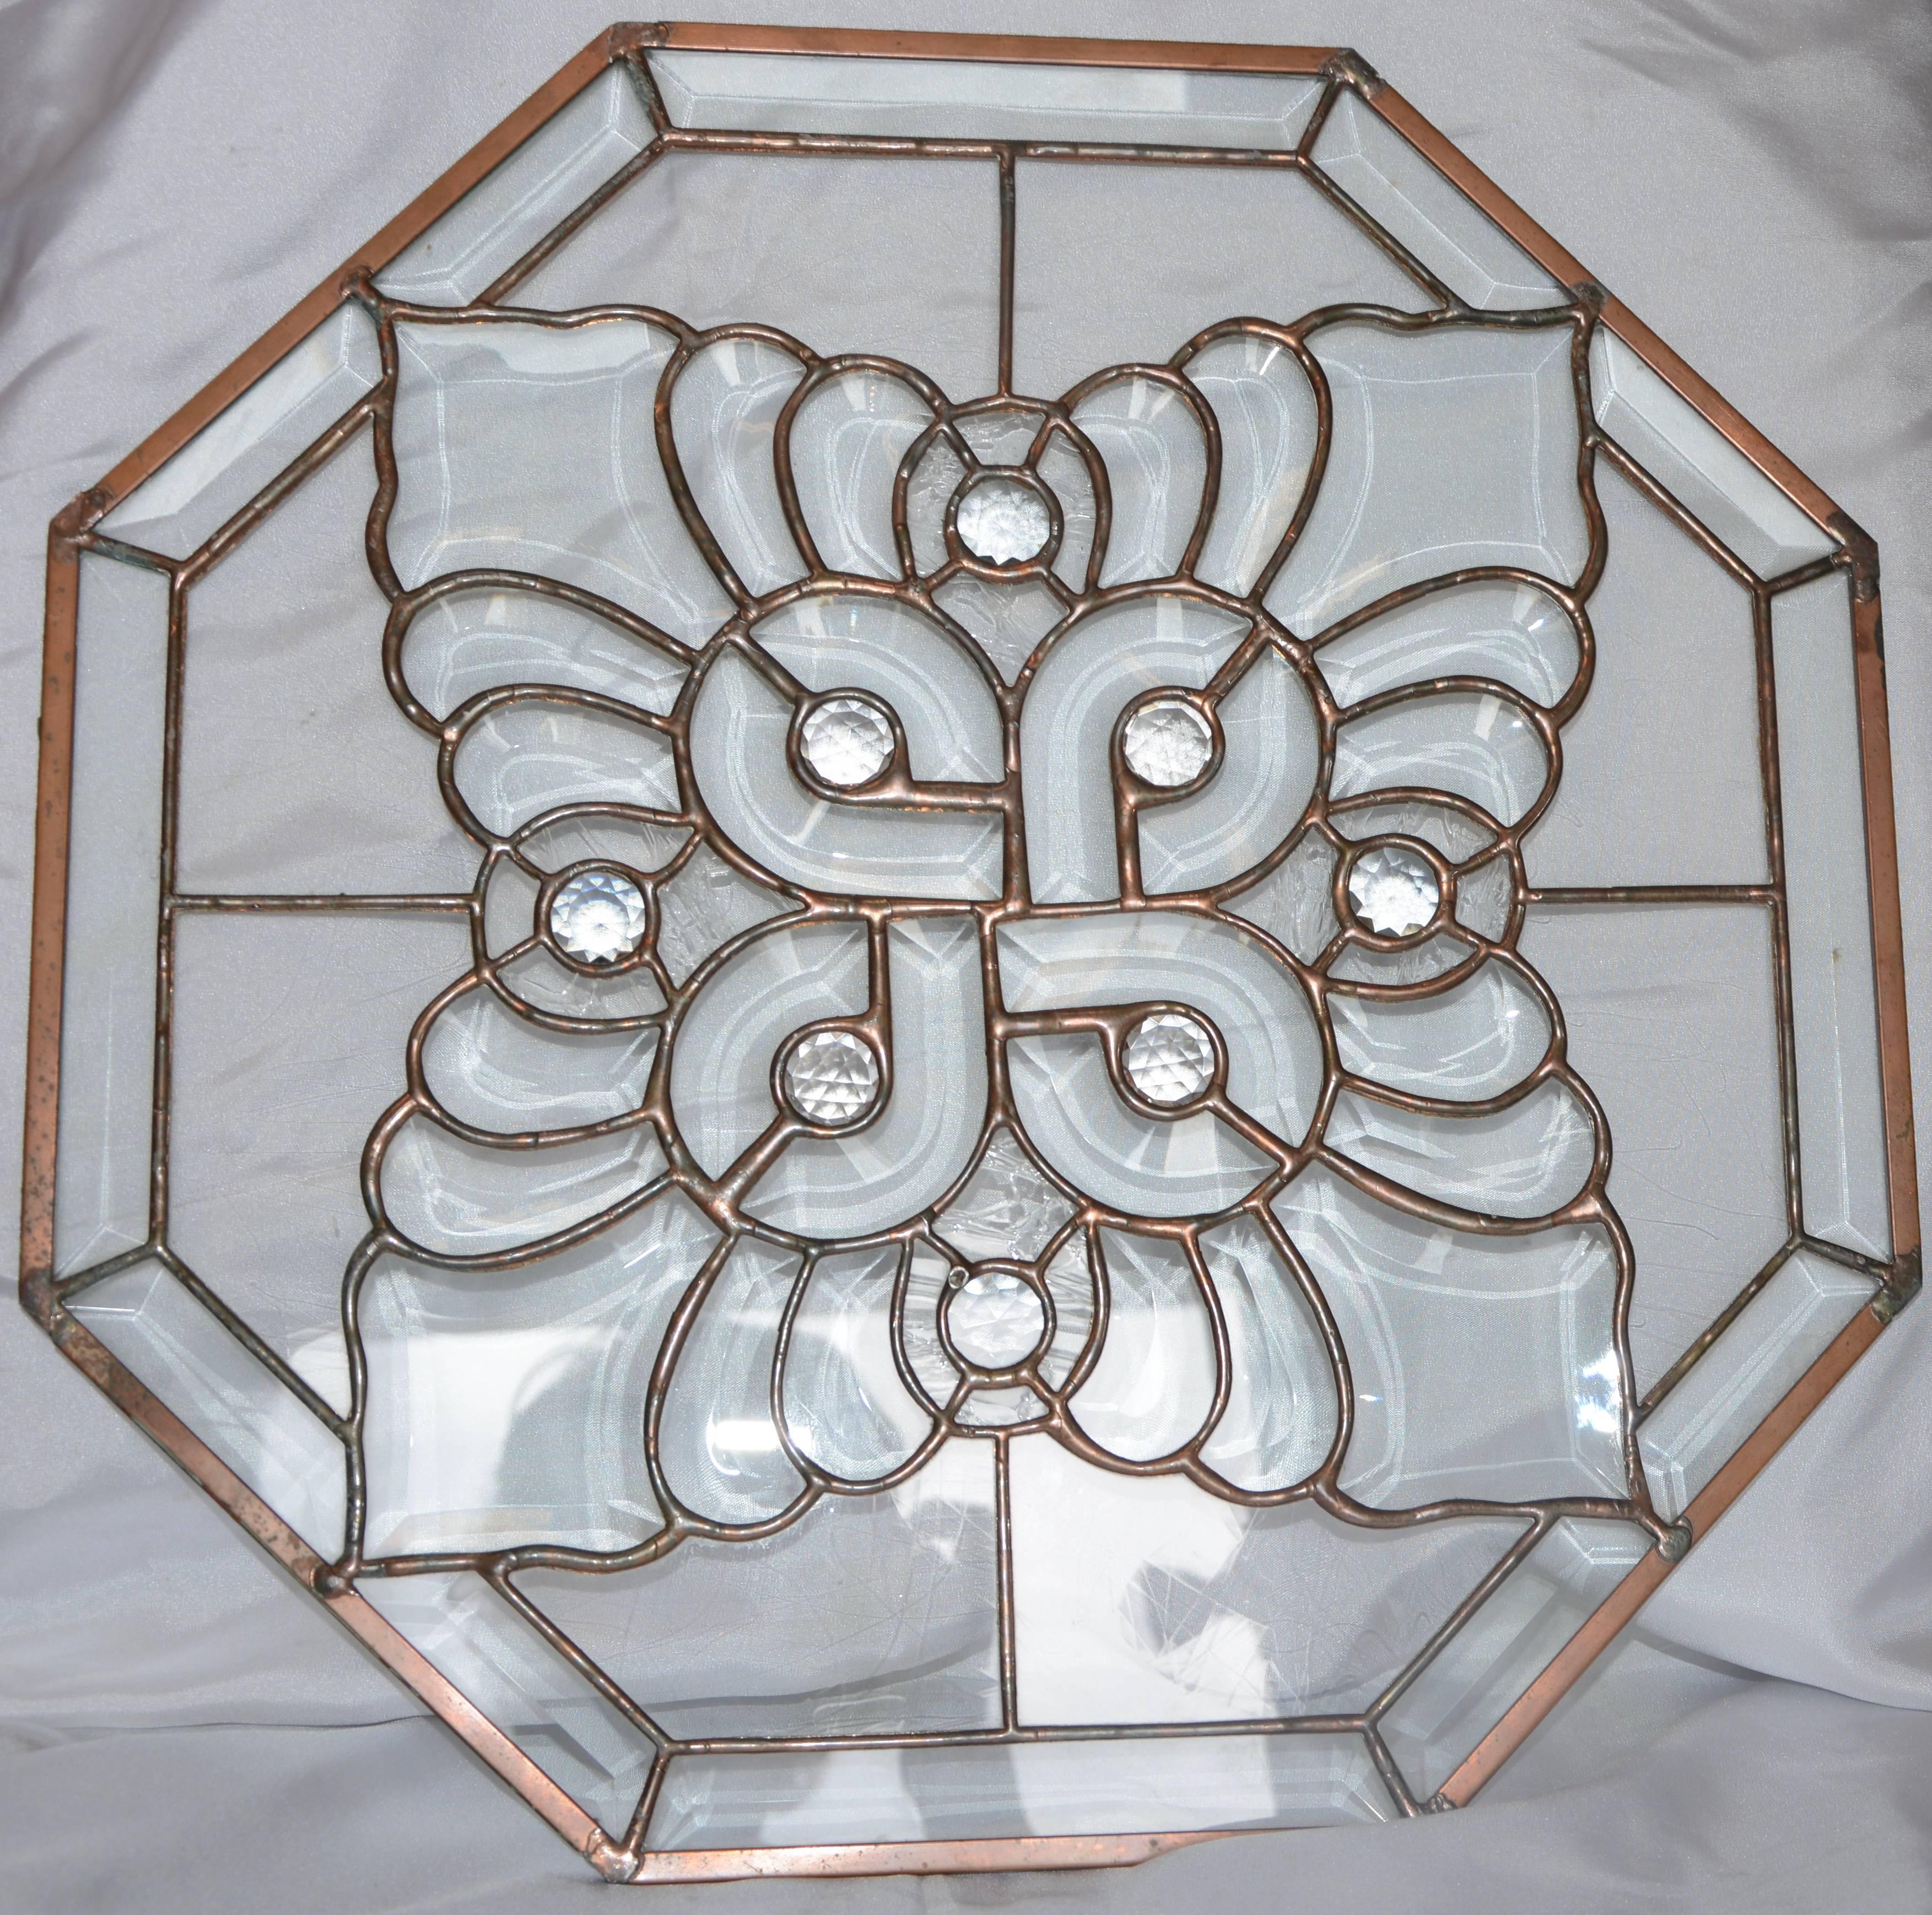 Clear Bevelled, Leaded Glass Mounted in Copper In Good Condition For Sale In Cookeville, TN